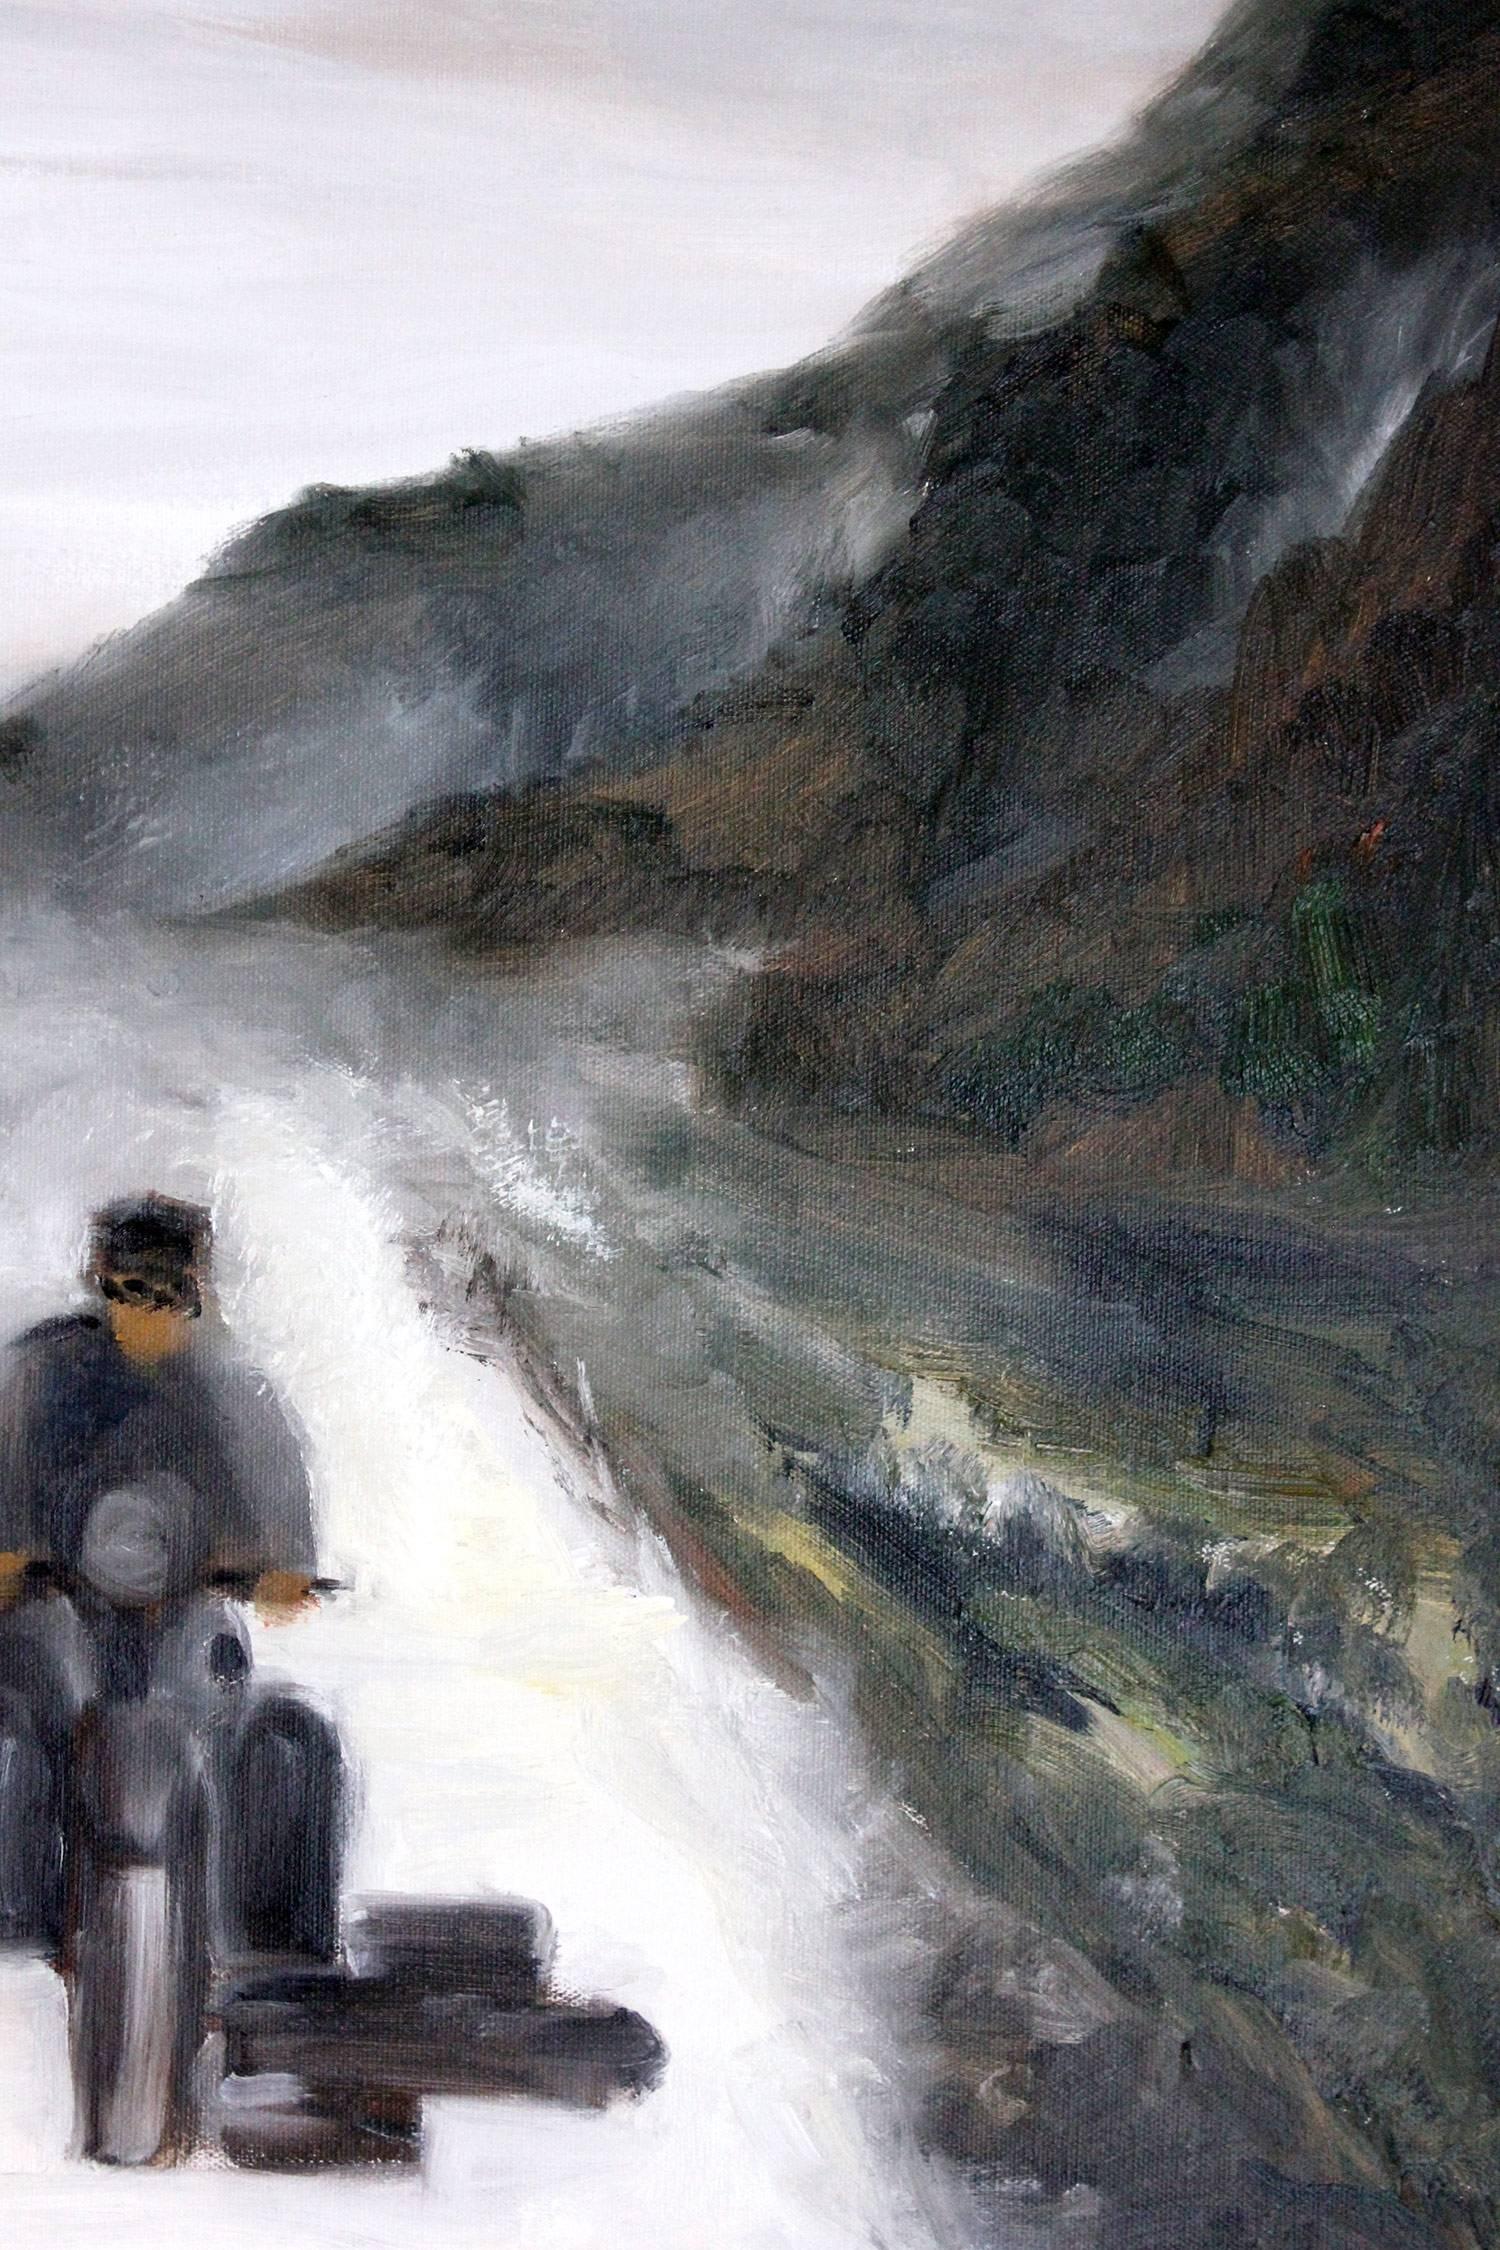 This scene depicts a scene from the 1930s. It is of a fictitious narrative with old cars, a motorbike, and bicycles. This scene depicts a mob chase through the roaring hills of California during the Hollywood Era. With a subdued color pallet